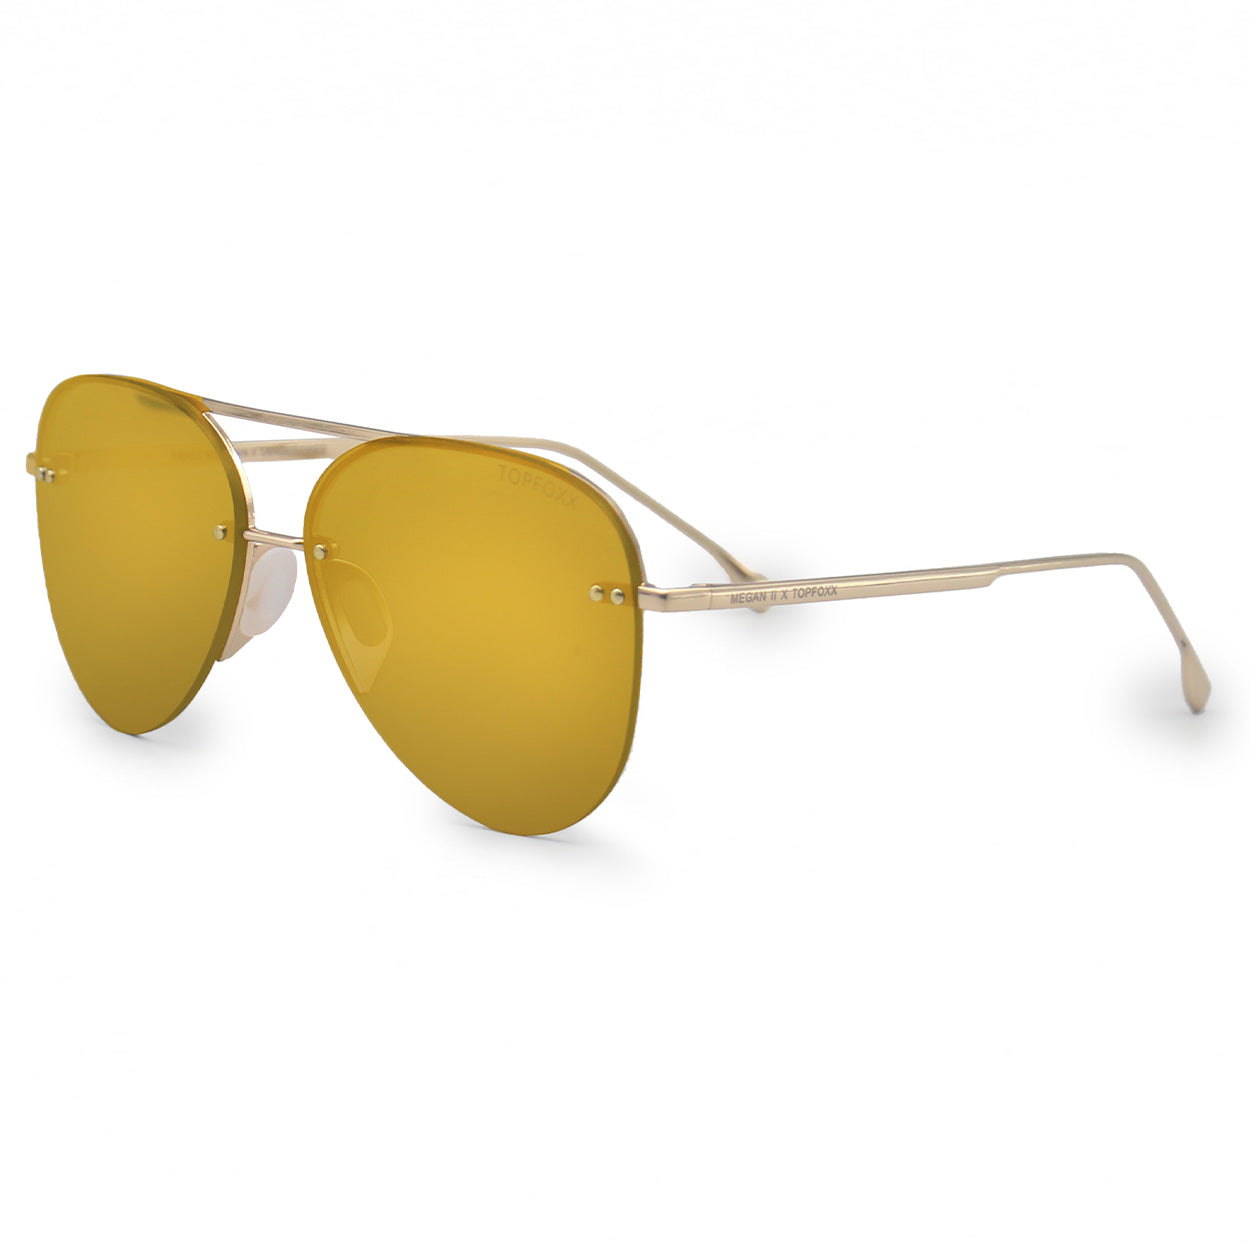 White background side image of classic aviators with no nosepad and mirrored gold lenses with metal detailing